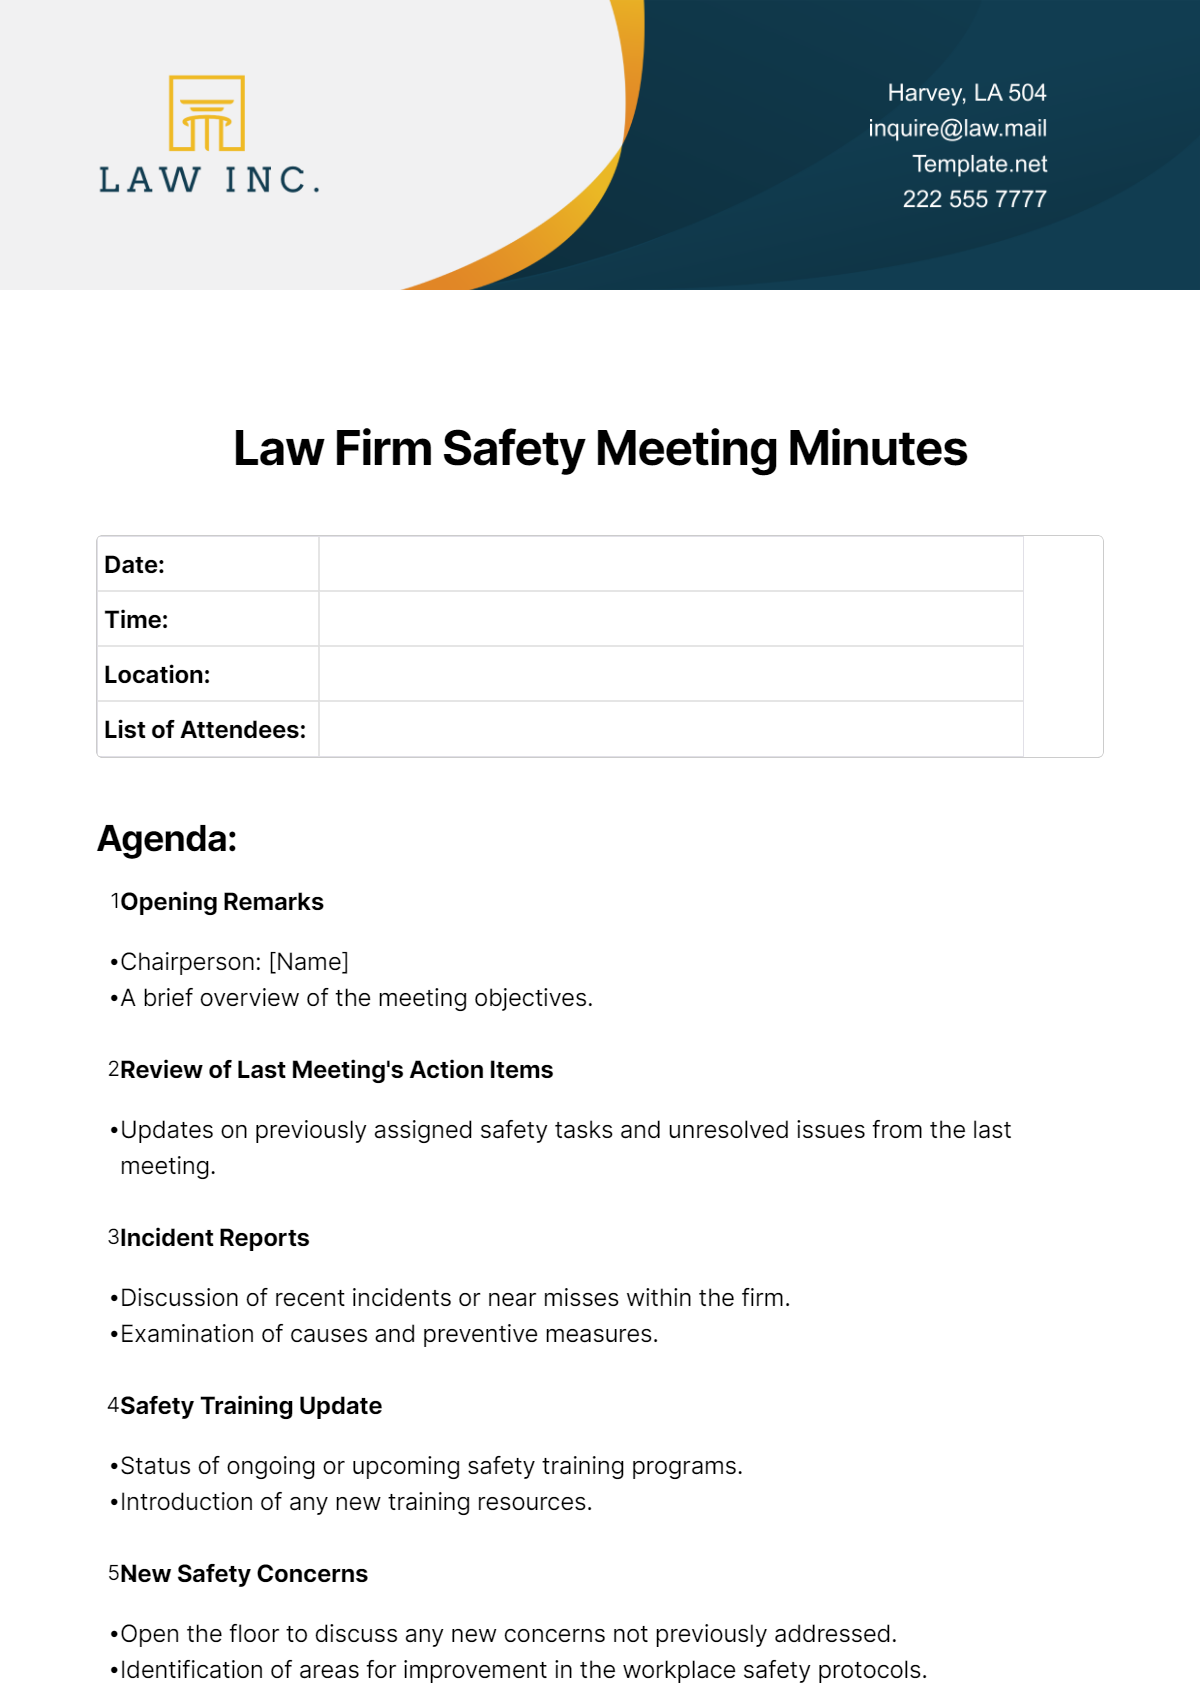 Free Law Firm Safety Meeting Minutes Template